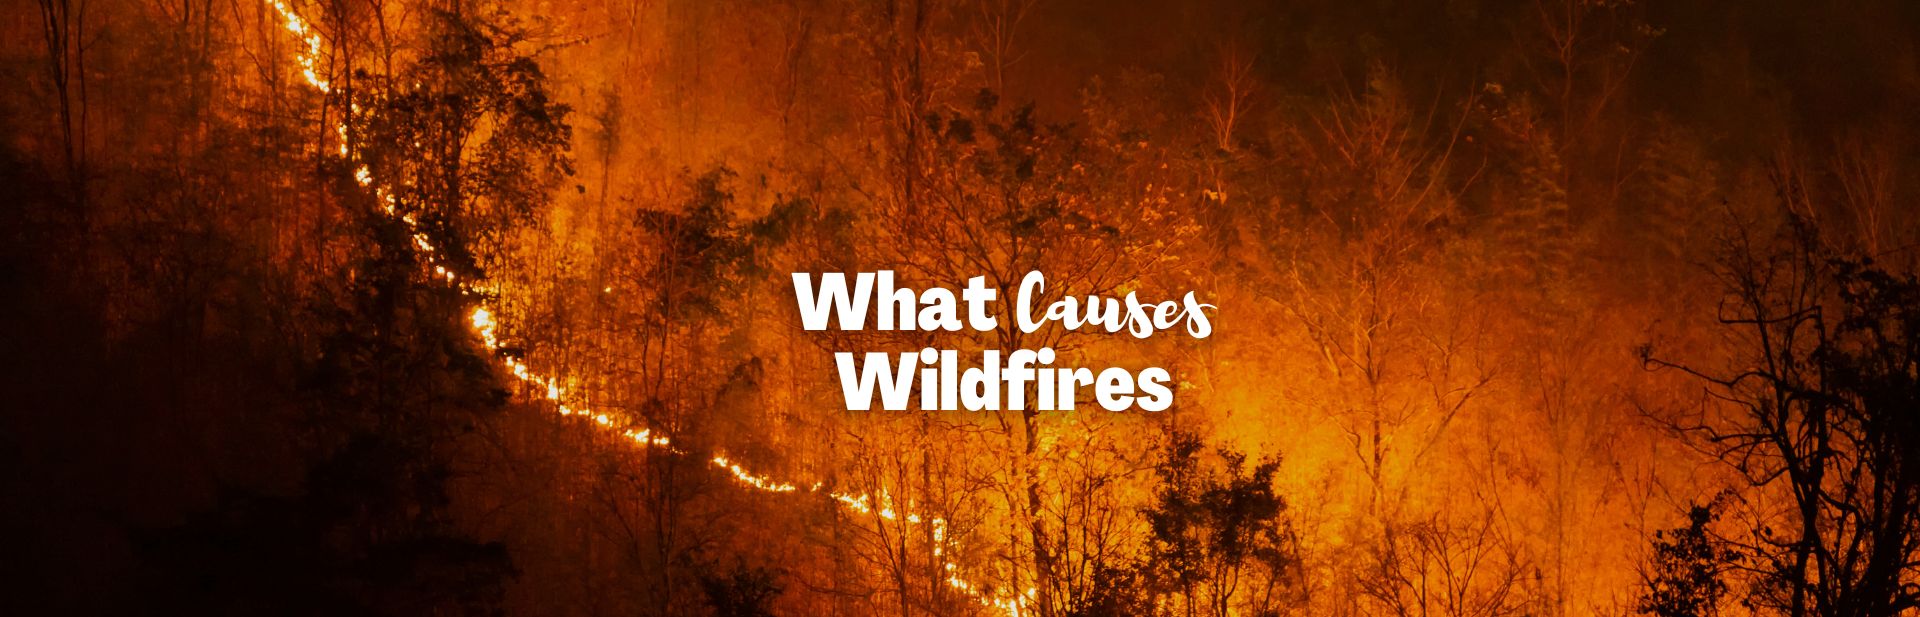 Man vs Nature: Understanding What Causes Wildfires and How We Contribute